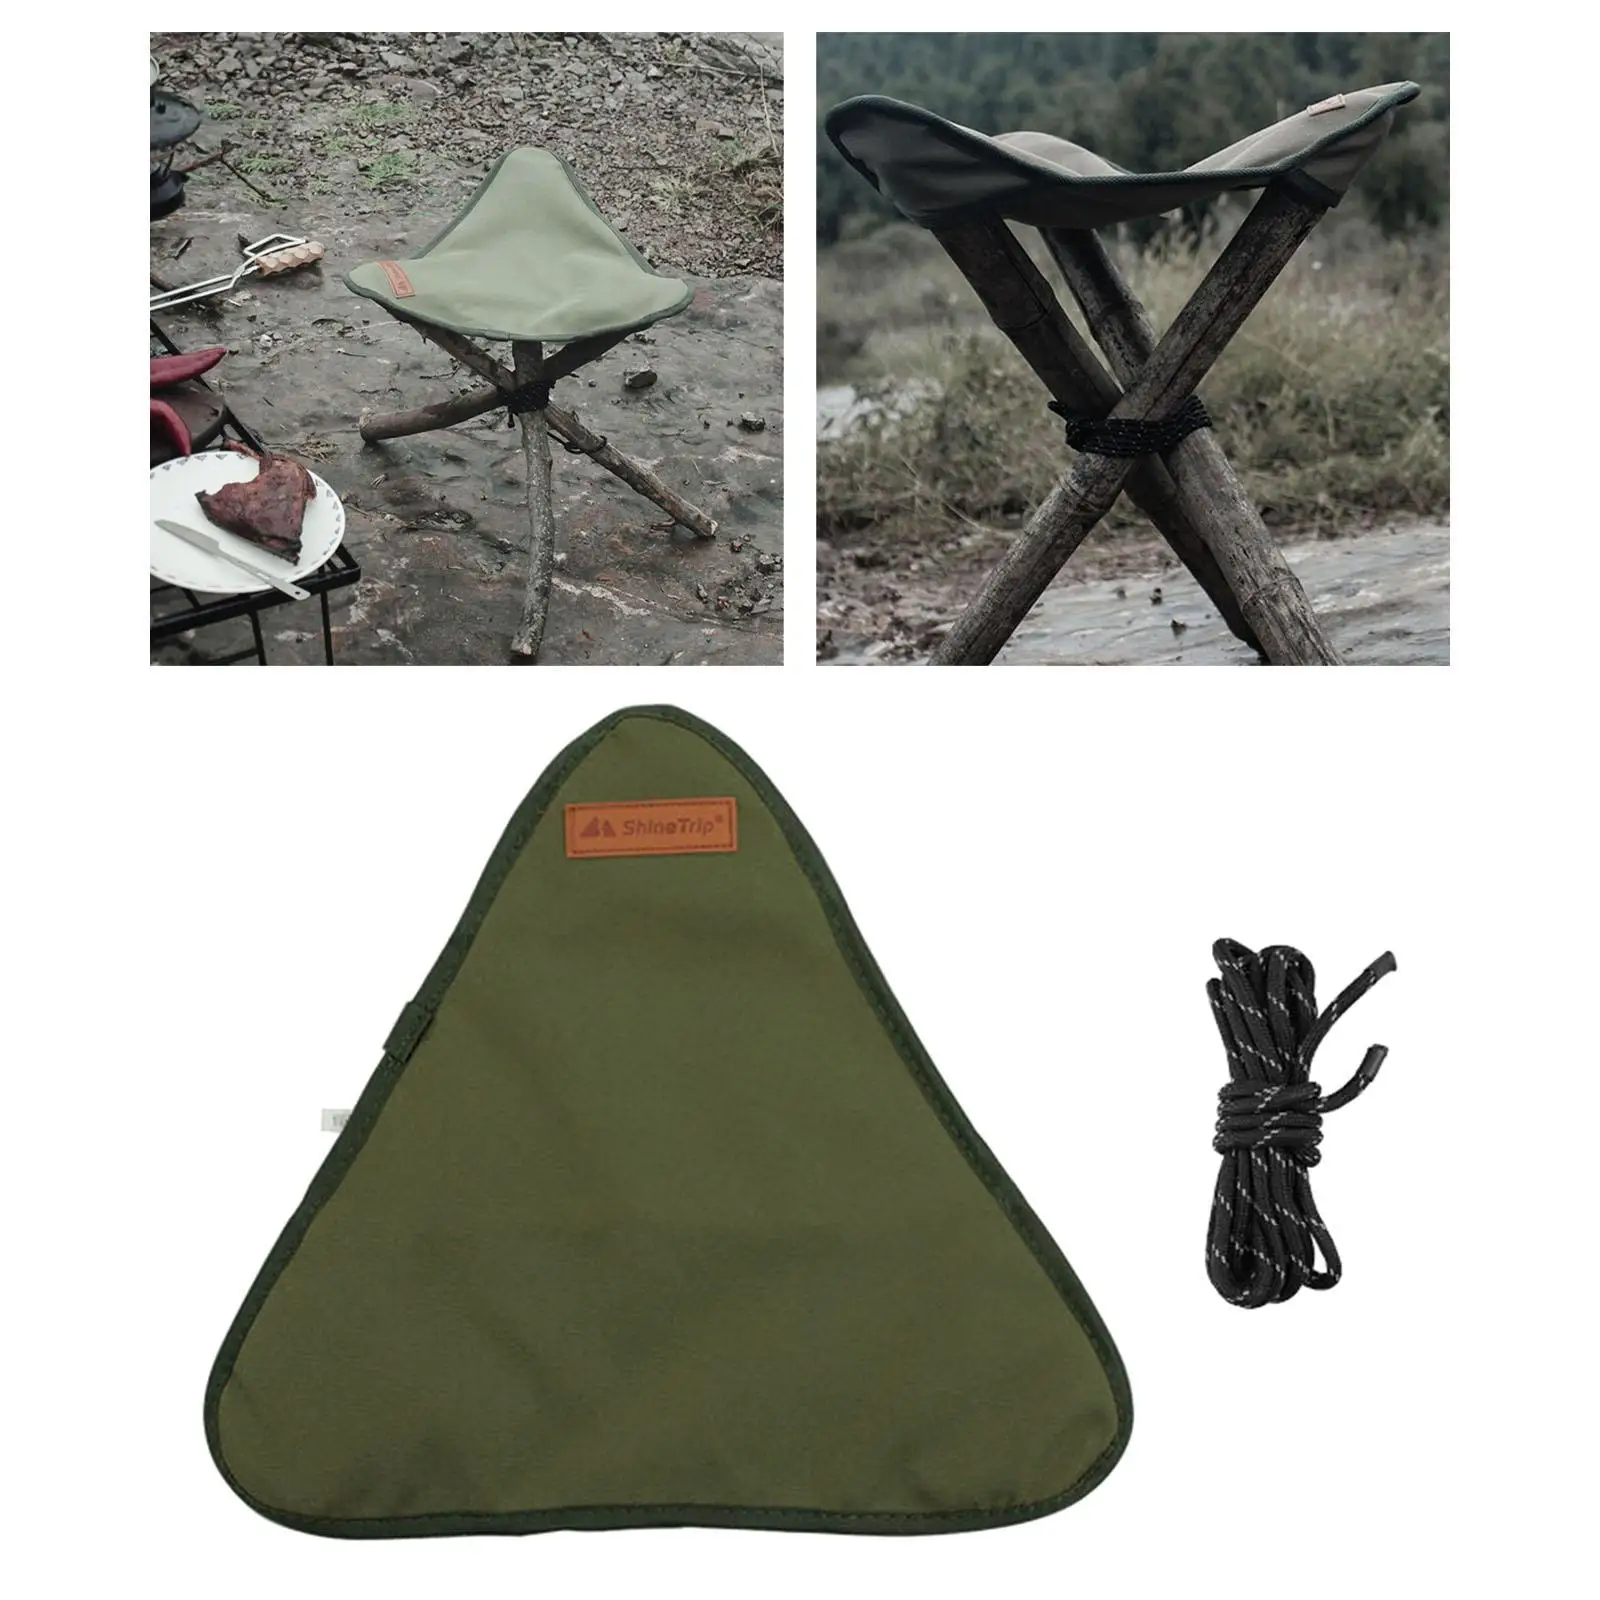 Foldable Tripod Stool Cloth, Slacker Oxford Cloth Waterproof   Seat Cover, for Outdoor, Camping, Beach, Picnic Accessories